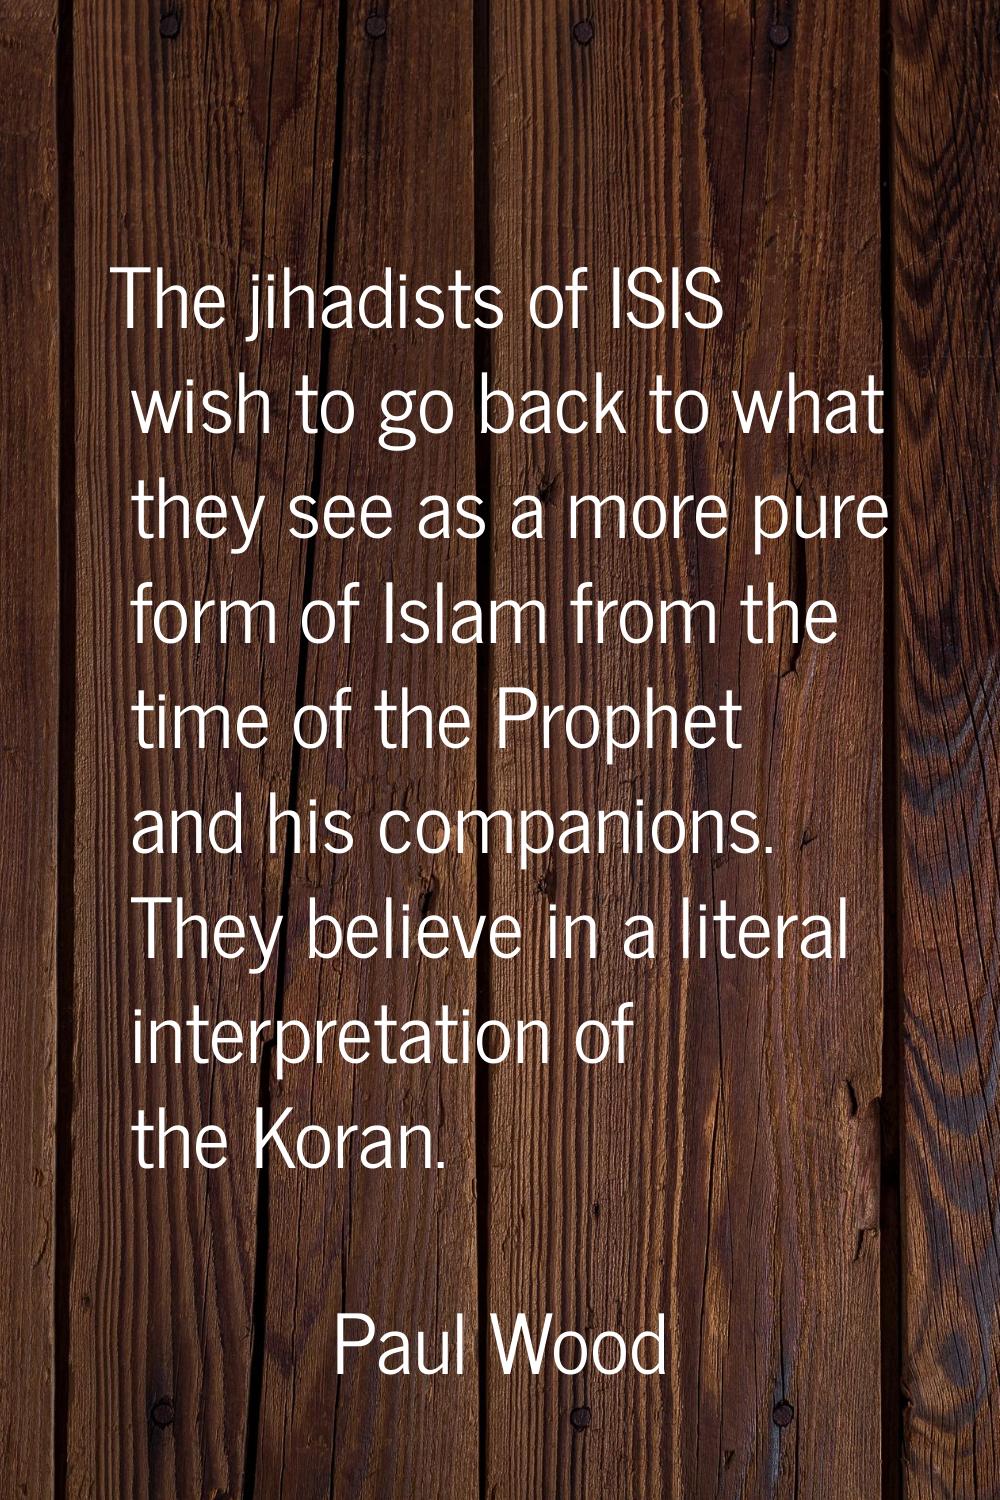 The jihadists of ISIS wish to go back to what they see as a more pure form of Islam from the time o